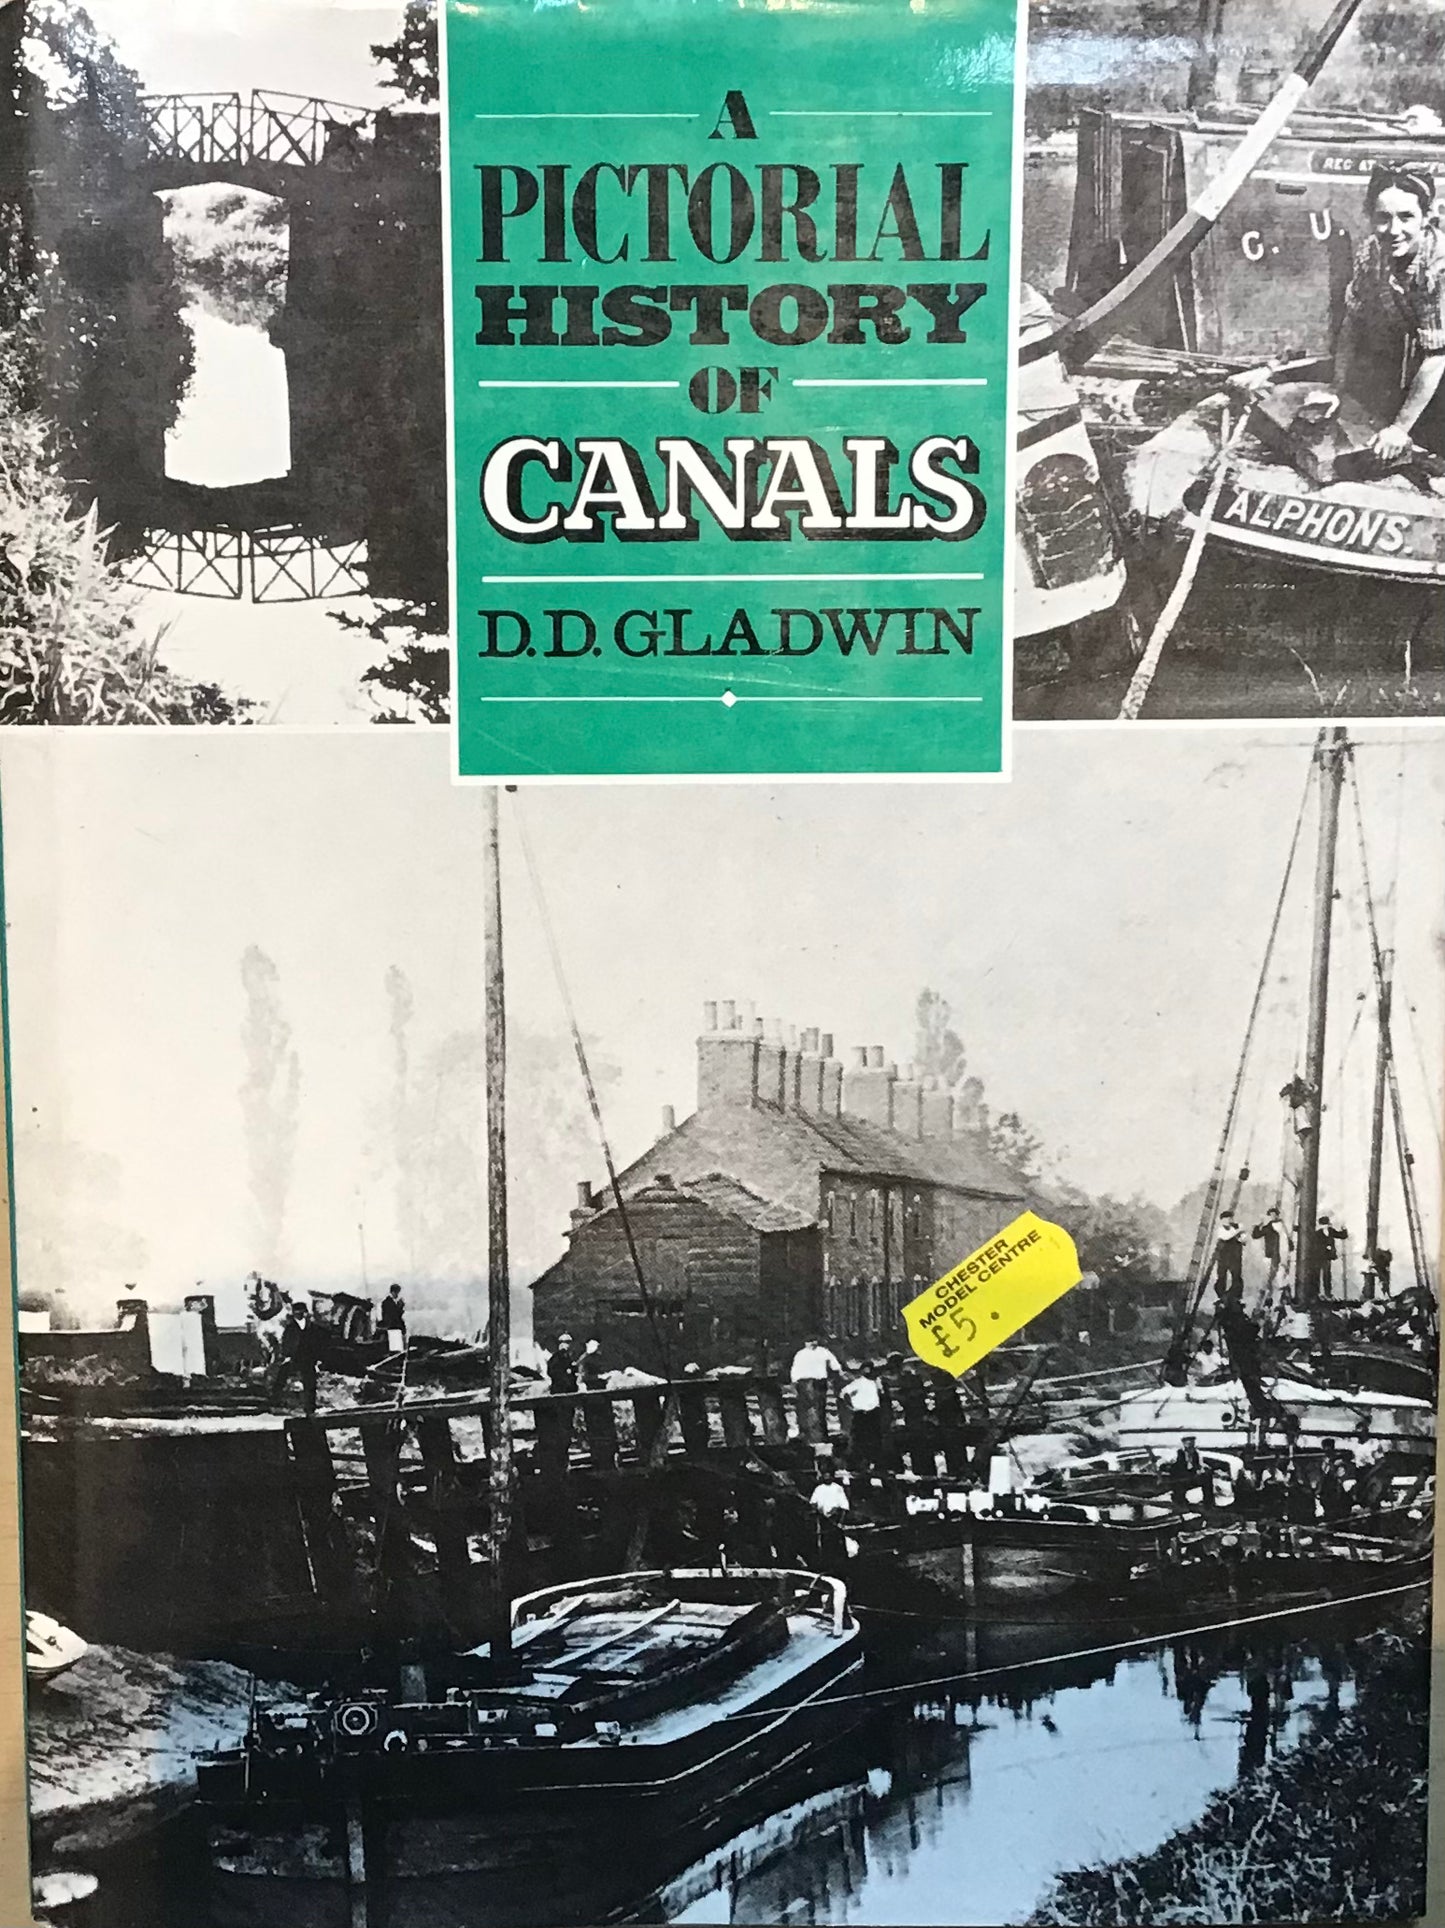 A Pictorial History of Canals by D.D. Gladwin - Chester Model Centre